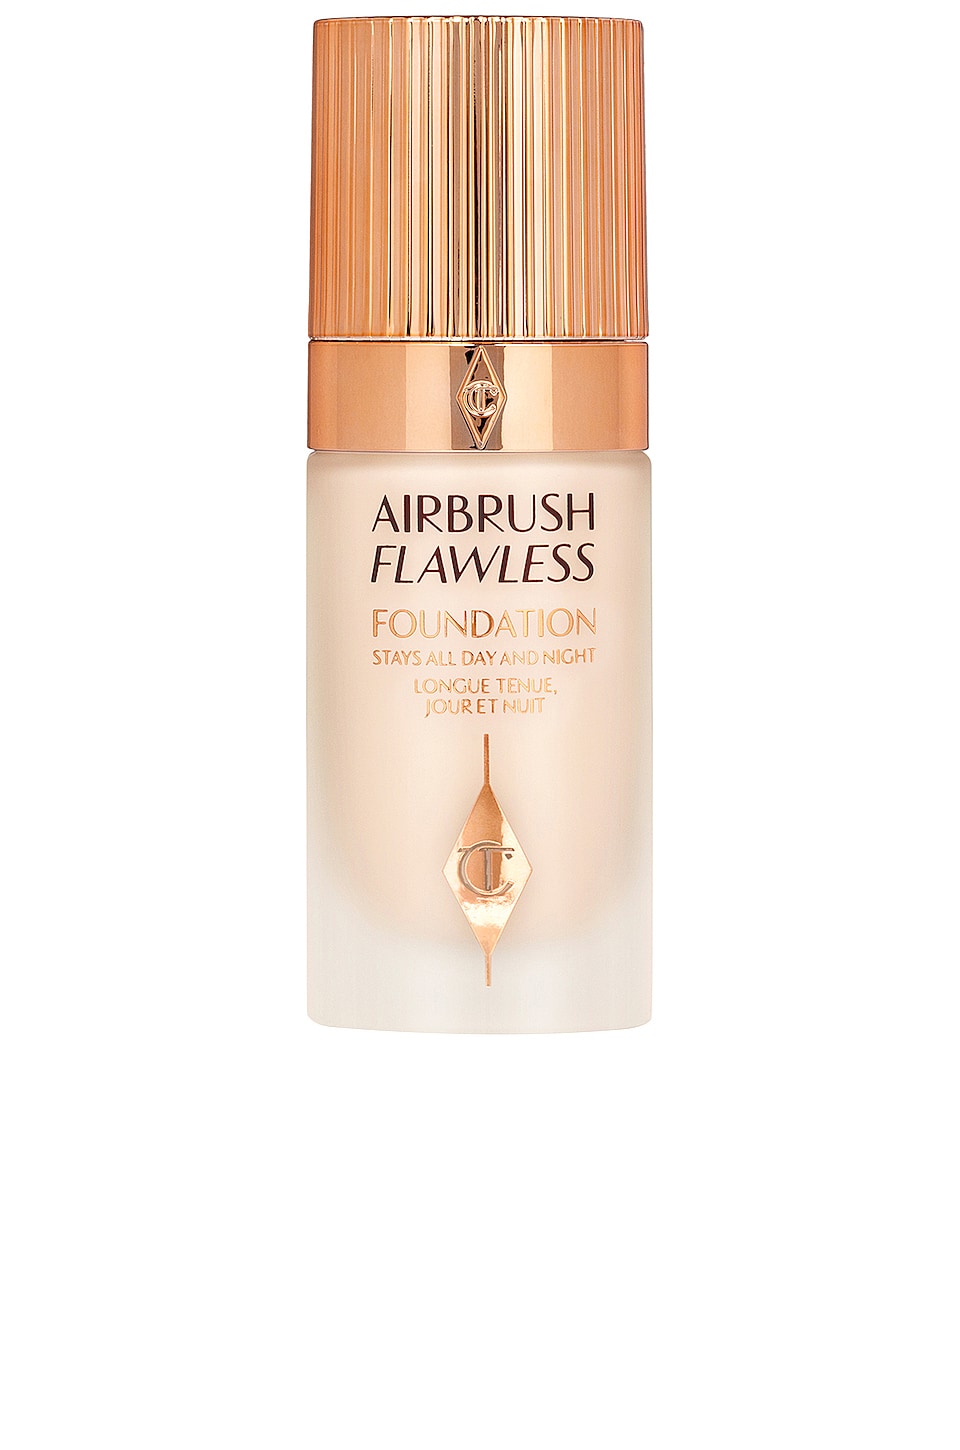 Charlotte Tilbury Airbrush Flawless Foundation in 1 Cool | REVOLVE